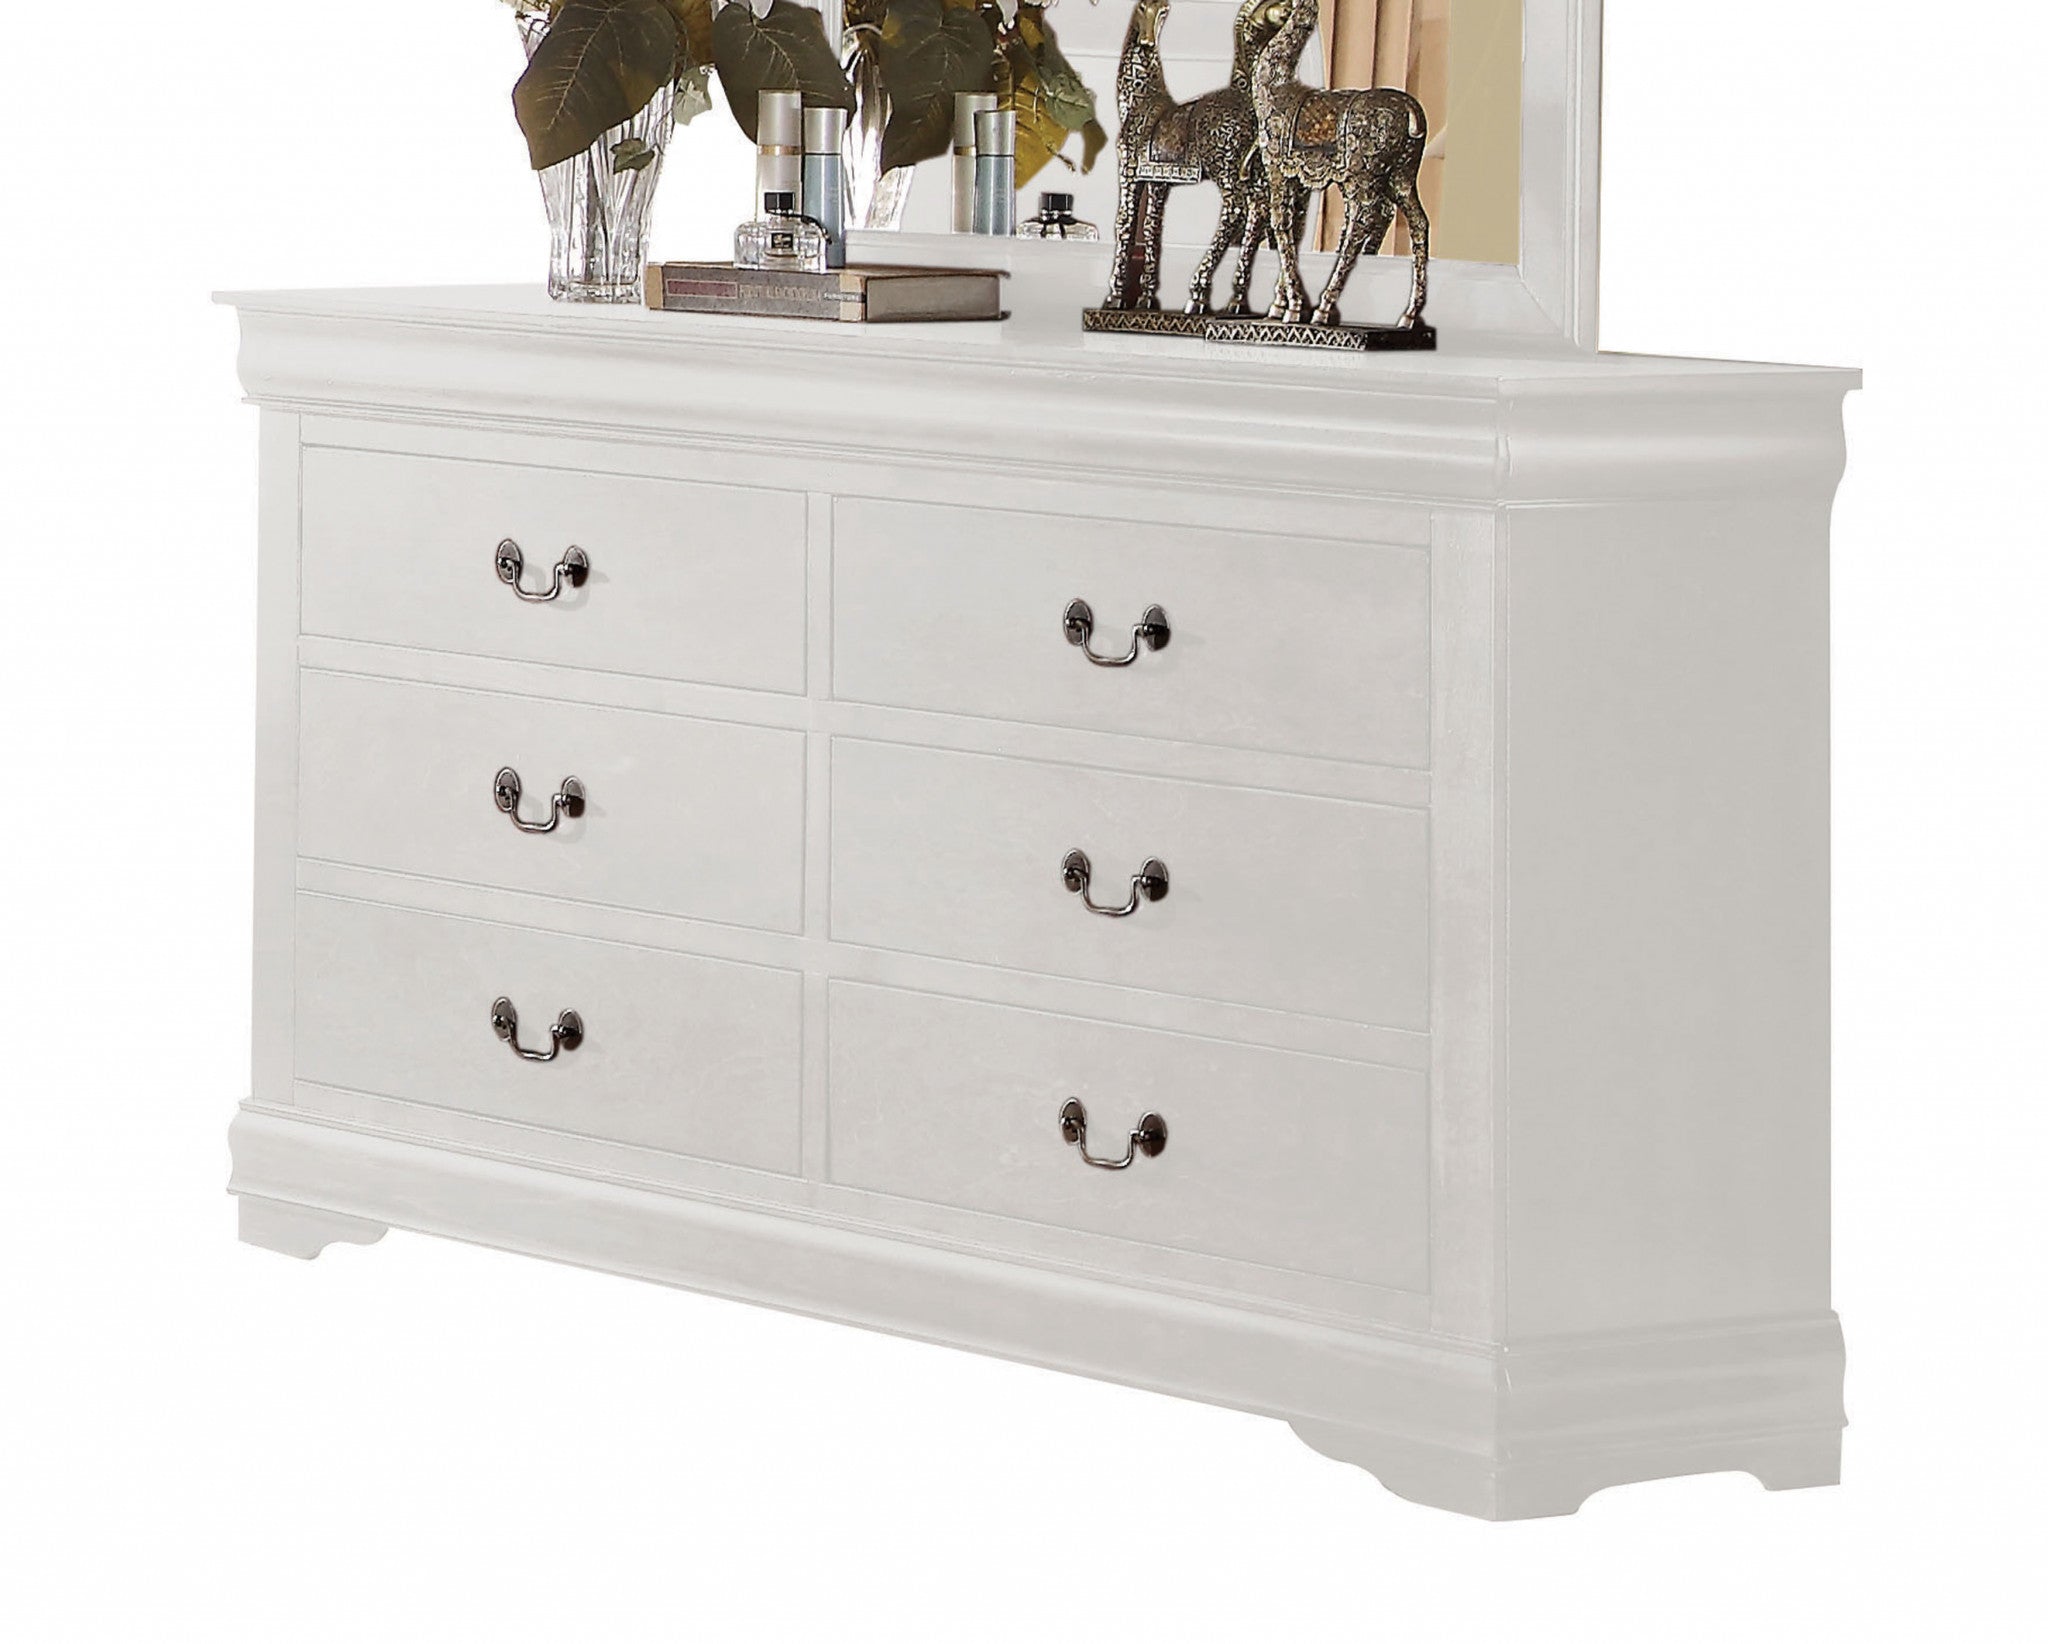 57" White Solid Wood Six Drawer Double Dresser Default Title